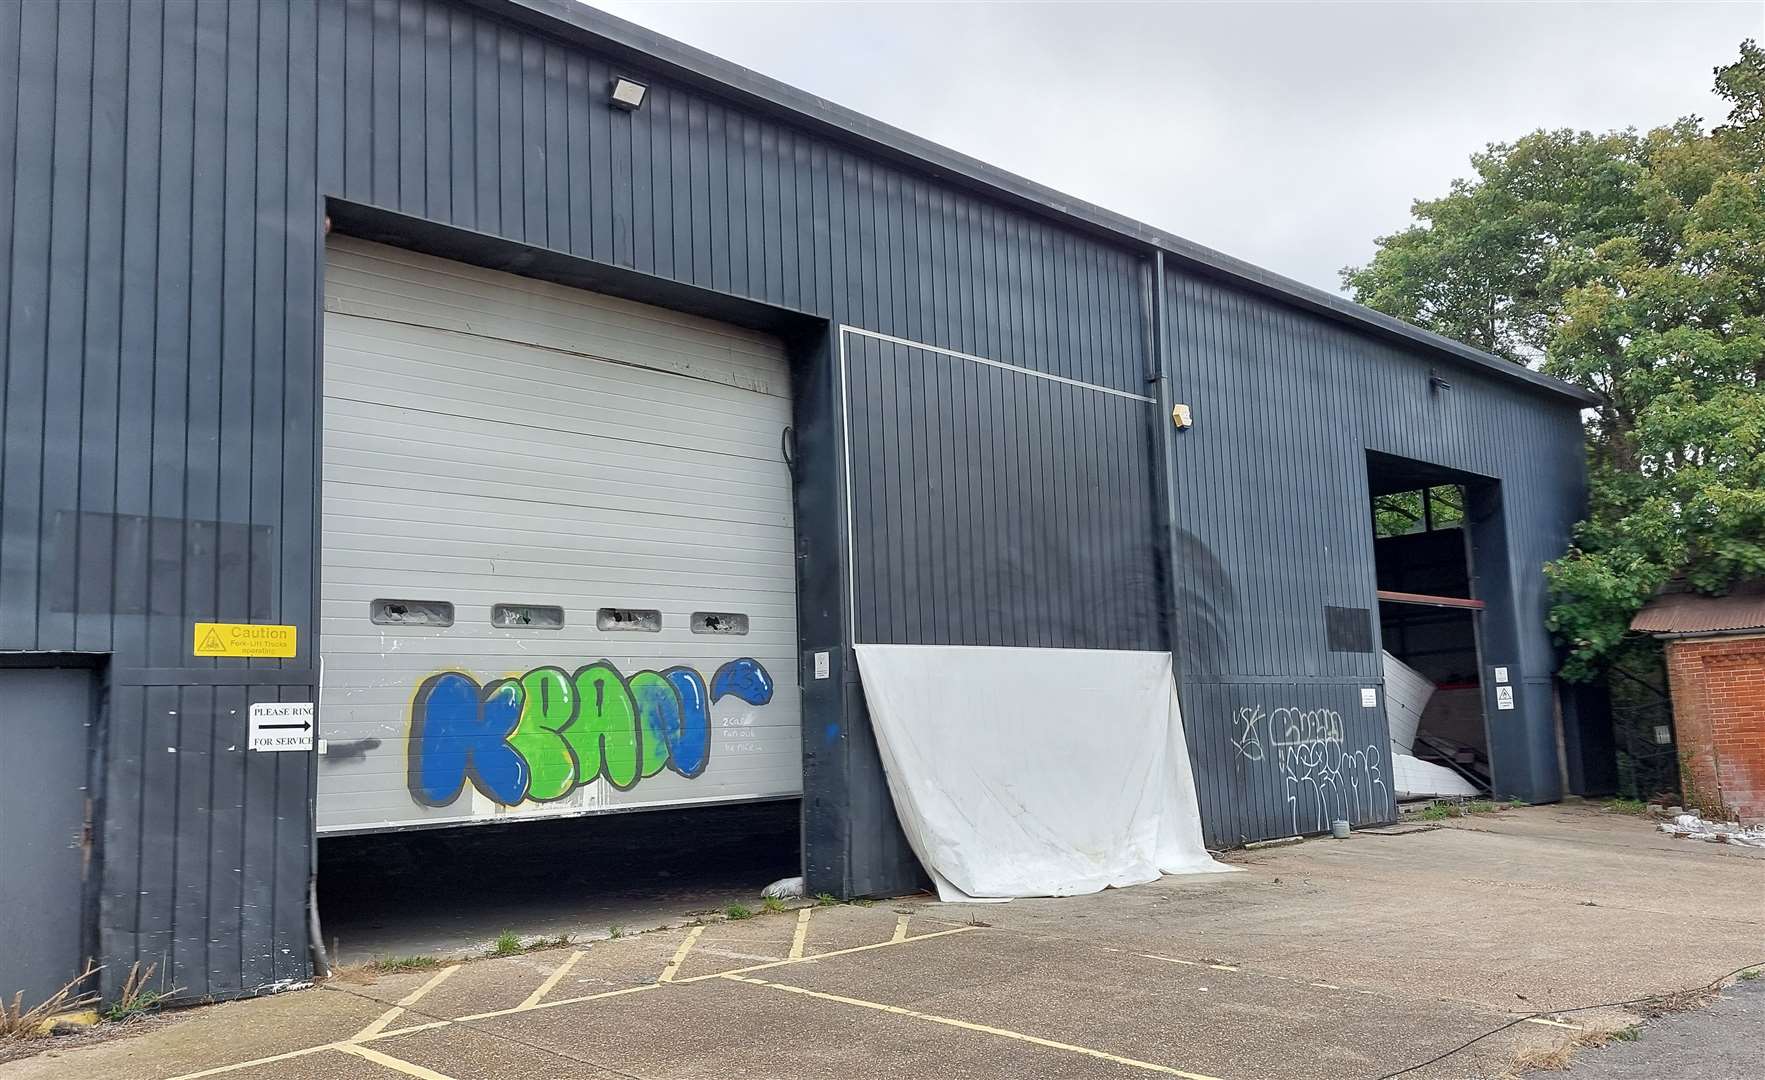 Graffiti tags have been sprayed on the disused buildings